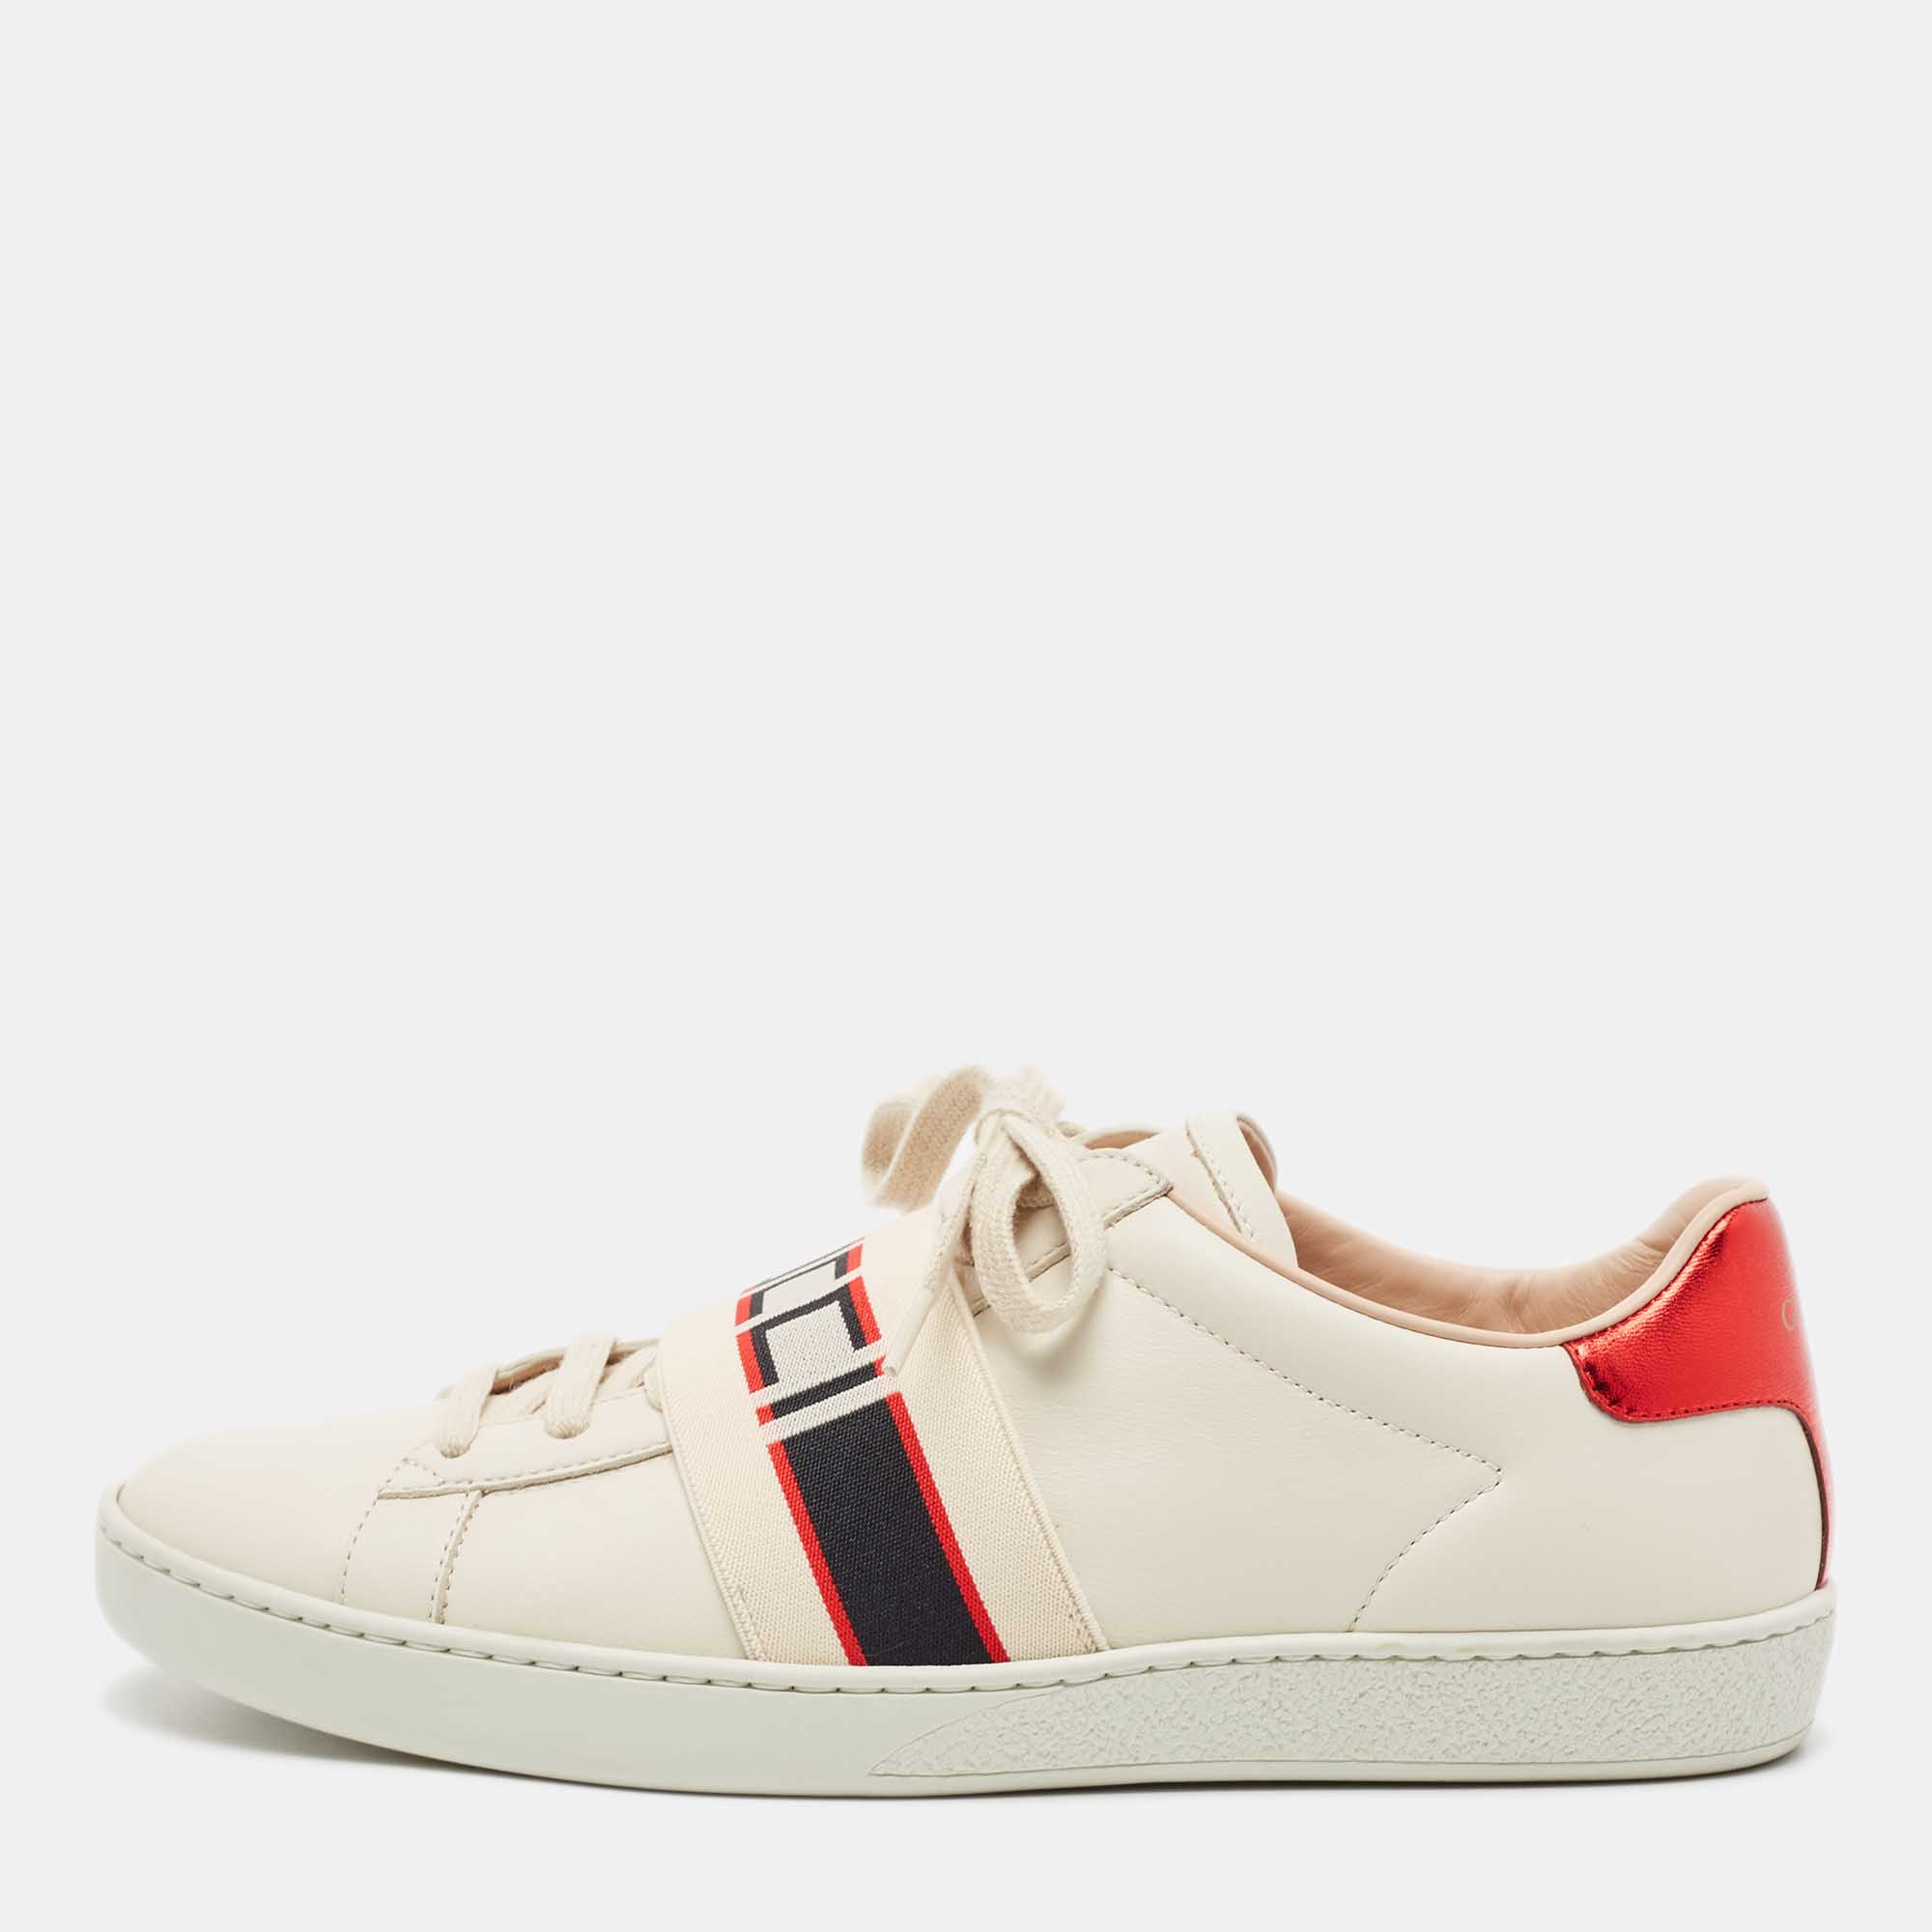 Pre-owned Gucci Cream Leather Logo Elastic Band Ace Sneakers Size 39